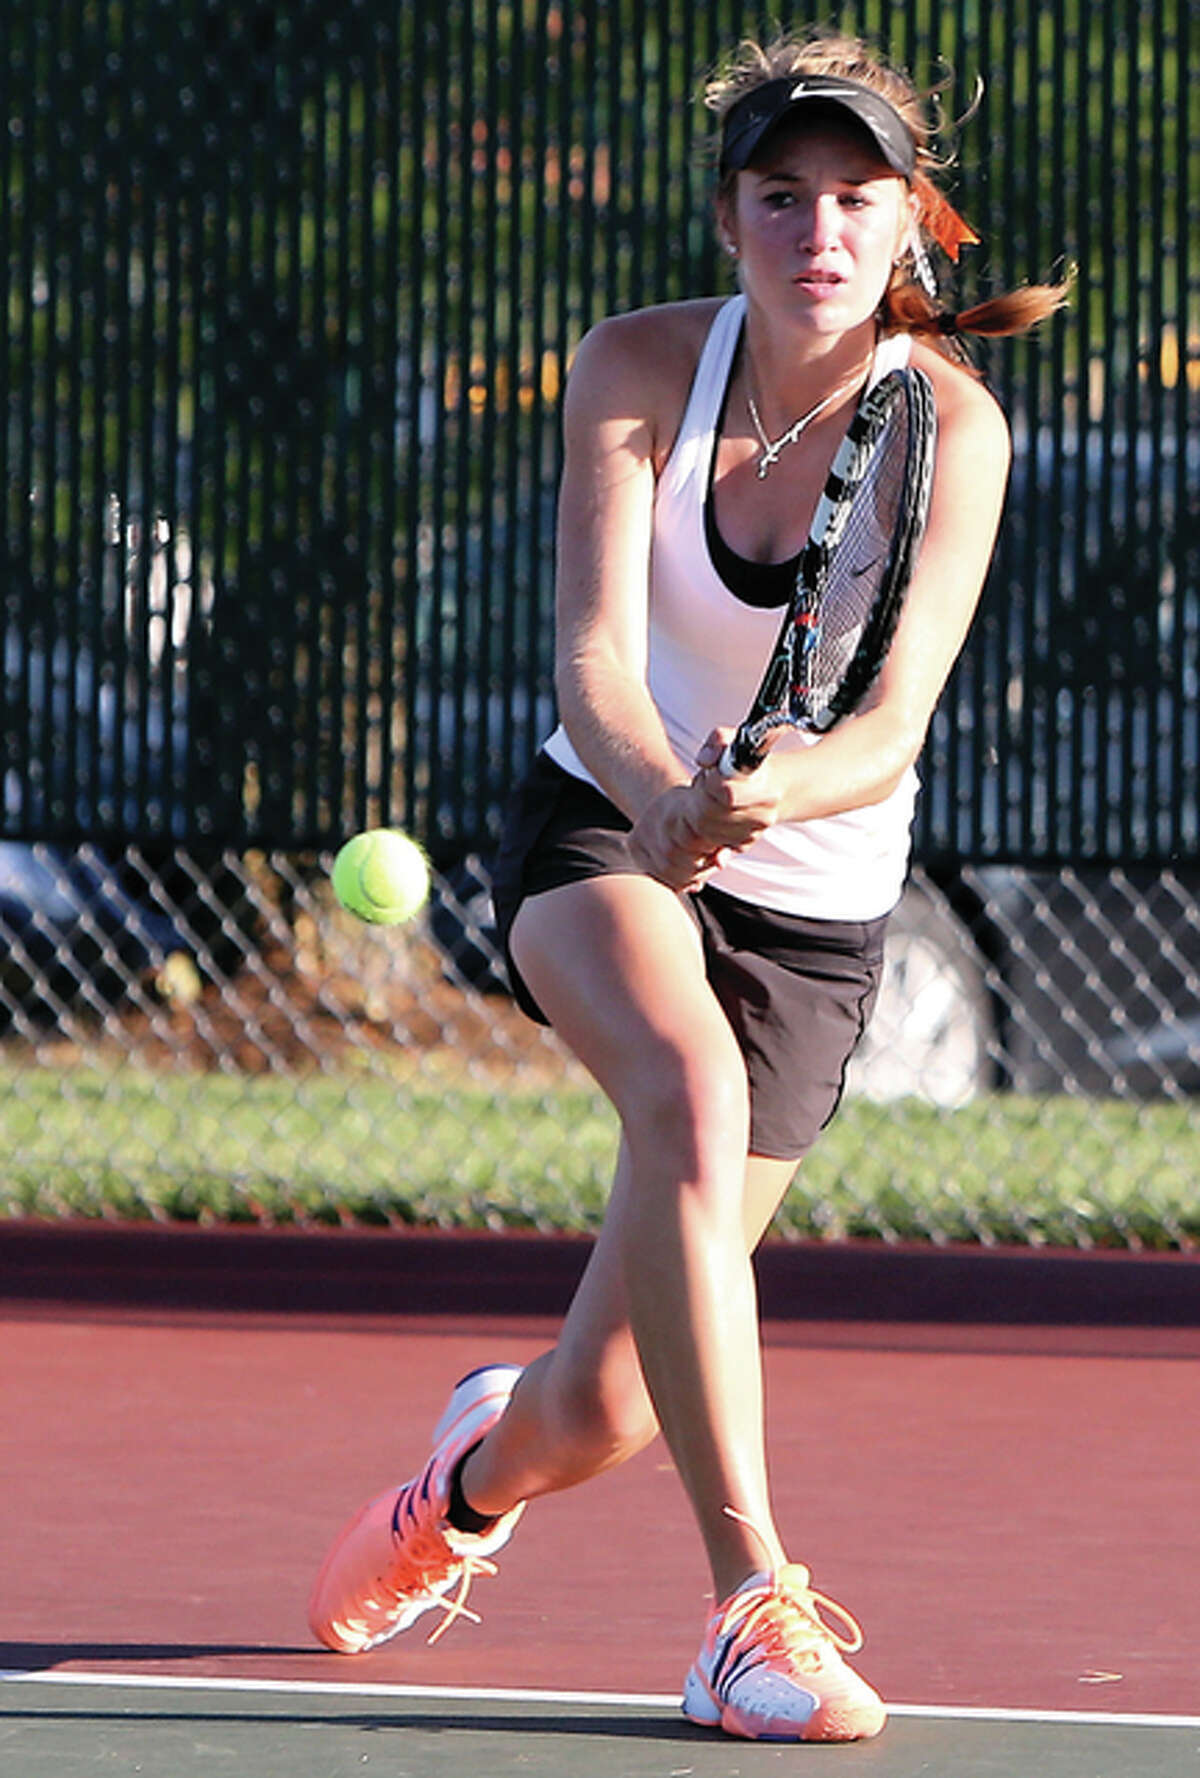 Edwardsville senior Callaghan Adams, a three-time Telegraph Player of the Year and three-time sectional champion, became the Tigers’ all-time career leader in victories with 155 after picking up three at No. 1 singles Saturday at the Lockport Invitational. Adams breaks the 14-year-old record of 153 set by Lindsay Anderson. Edwardsville also set a school record for dual wins in a season at 31 after going 5-0 at Lockport. The Tigers beat Romeoville, Hinsdale South, Highland Park, Neuqua Valley and Orland Park Sandburg – all by 5-0 scores – to win the championship at Lockport.